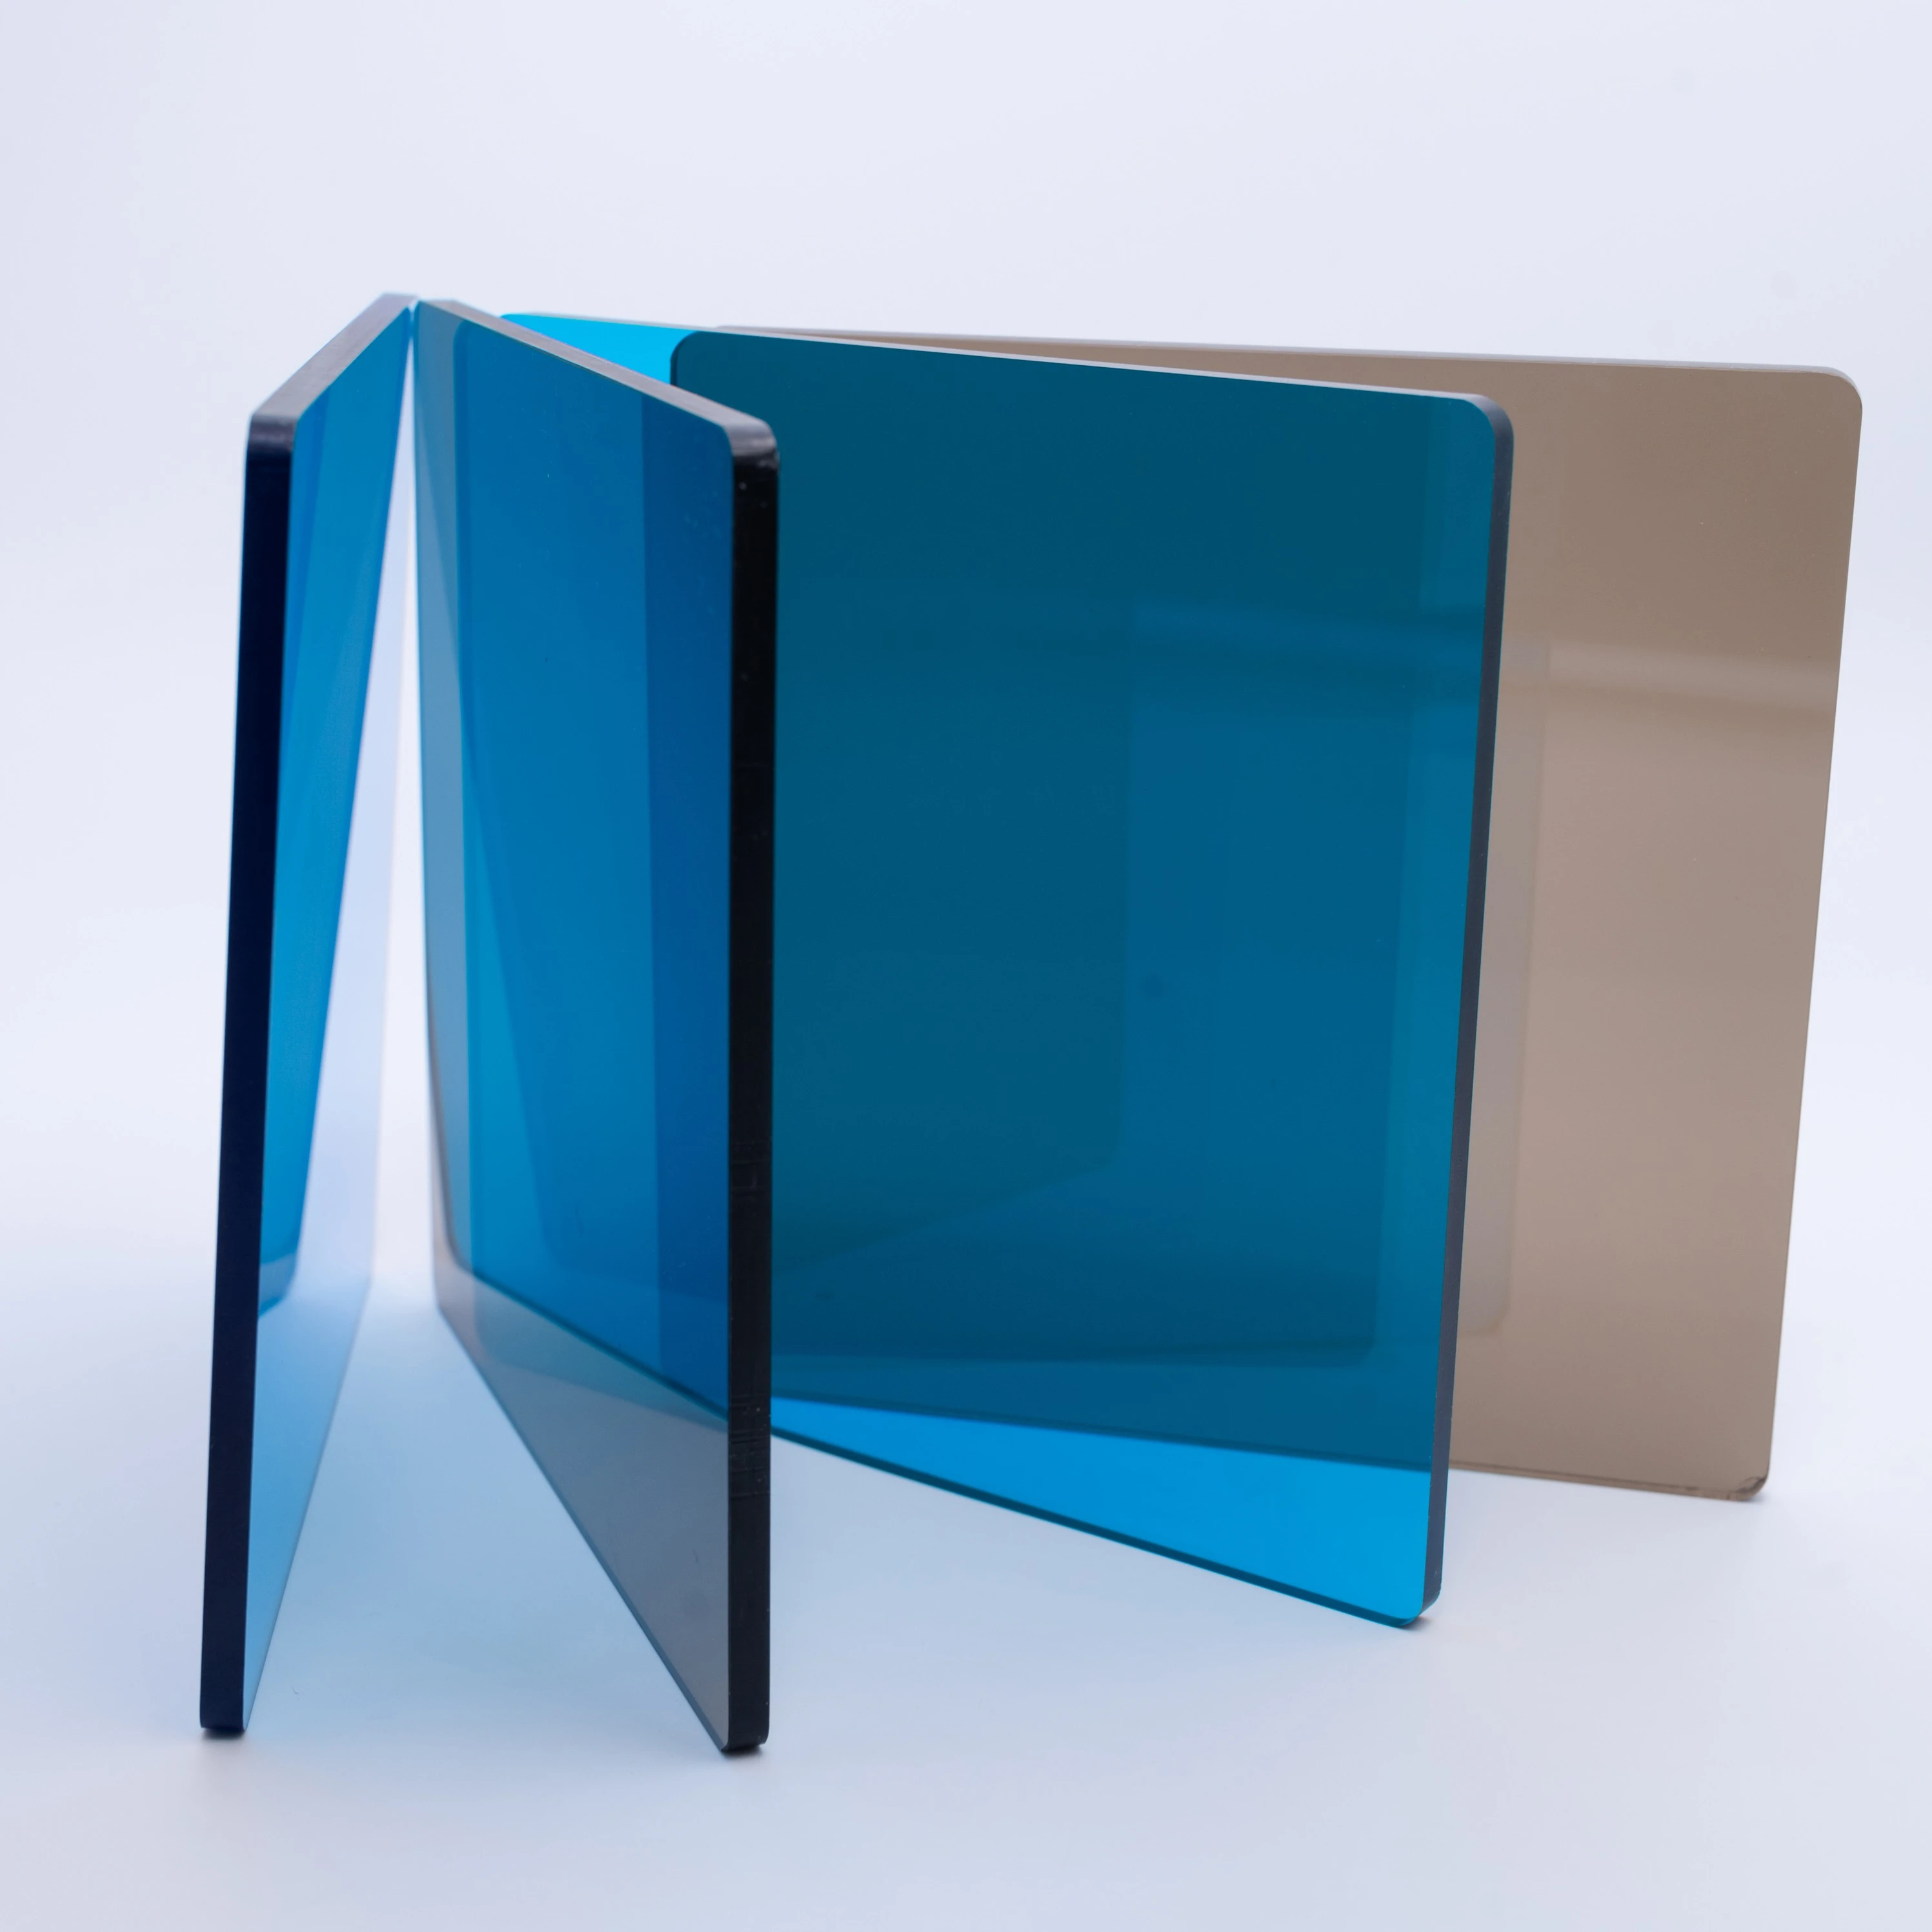 Andisco Quality Supplier 6mm Hard Coating Polycarbonate Acrylic Sheet Durable Perspex Plastic Cutting Moulding Processing